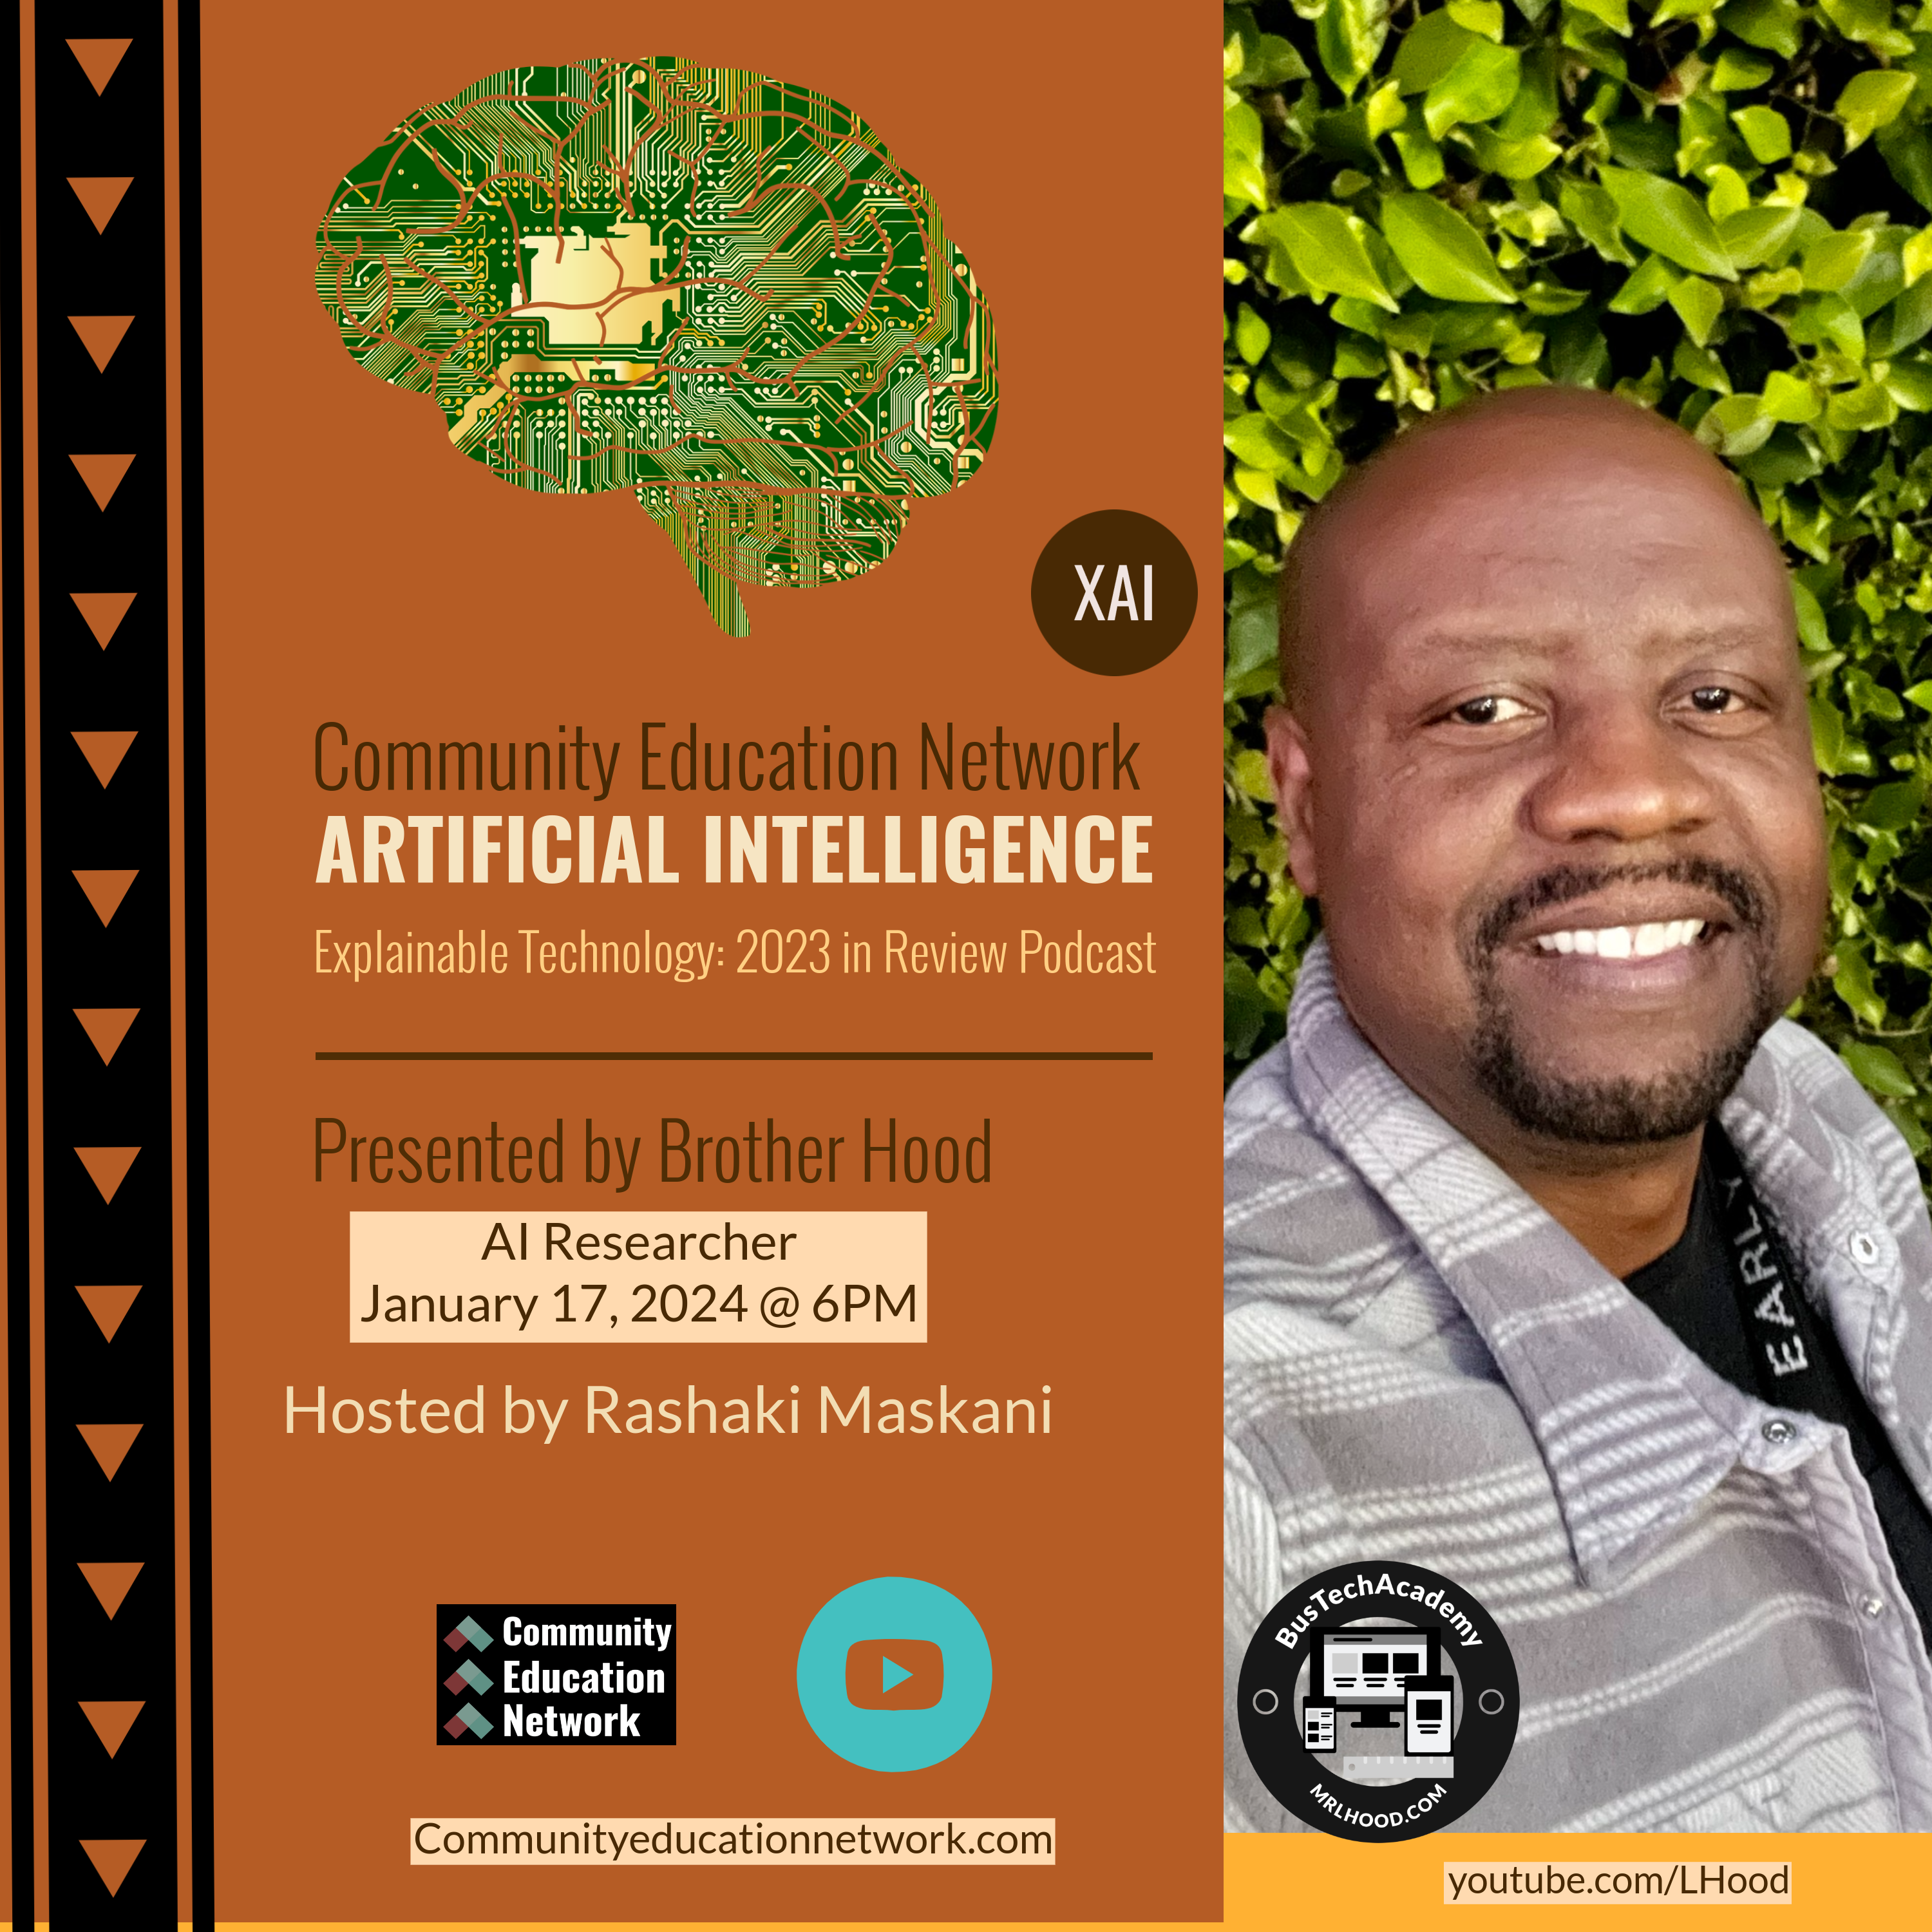 Brother Hood - "Artificial Intelligence - Explainable Technology: 2023 in Review"